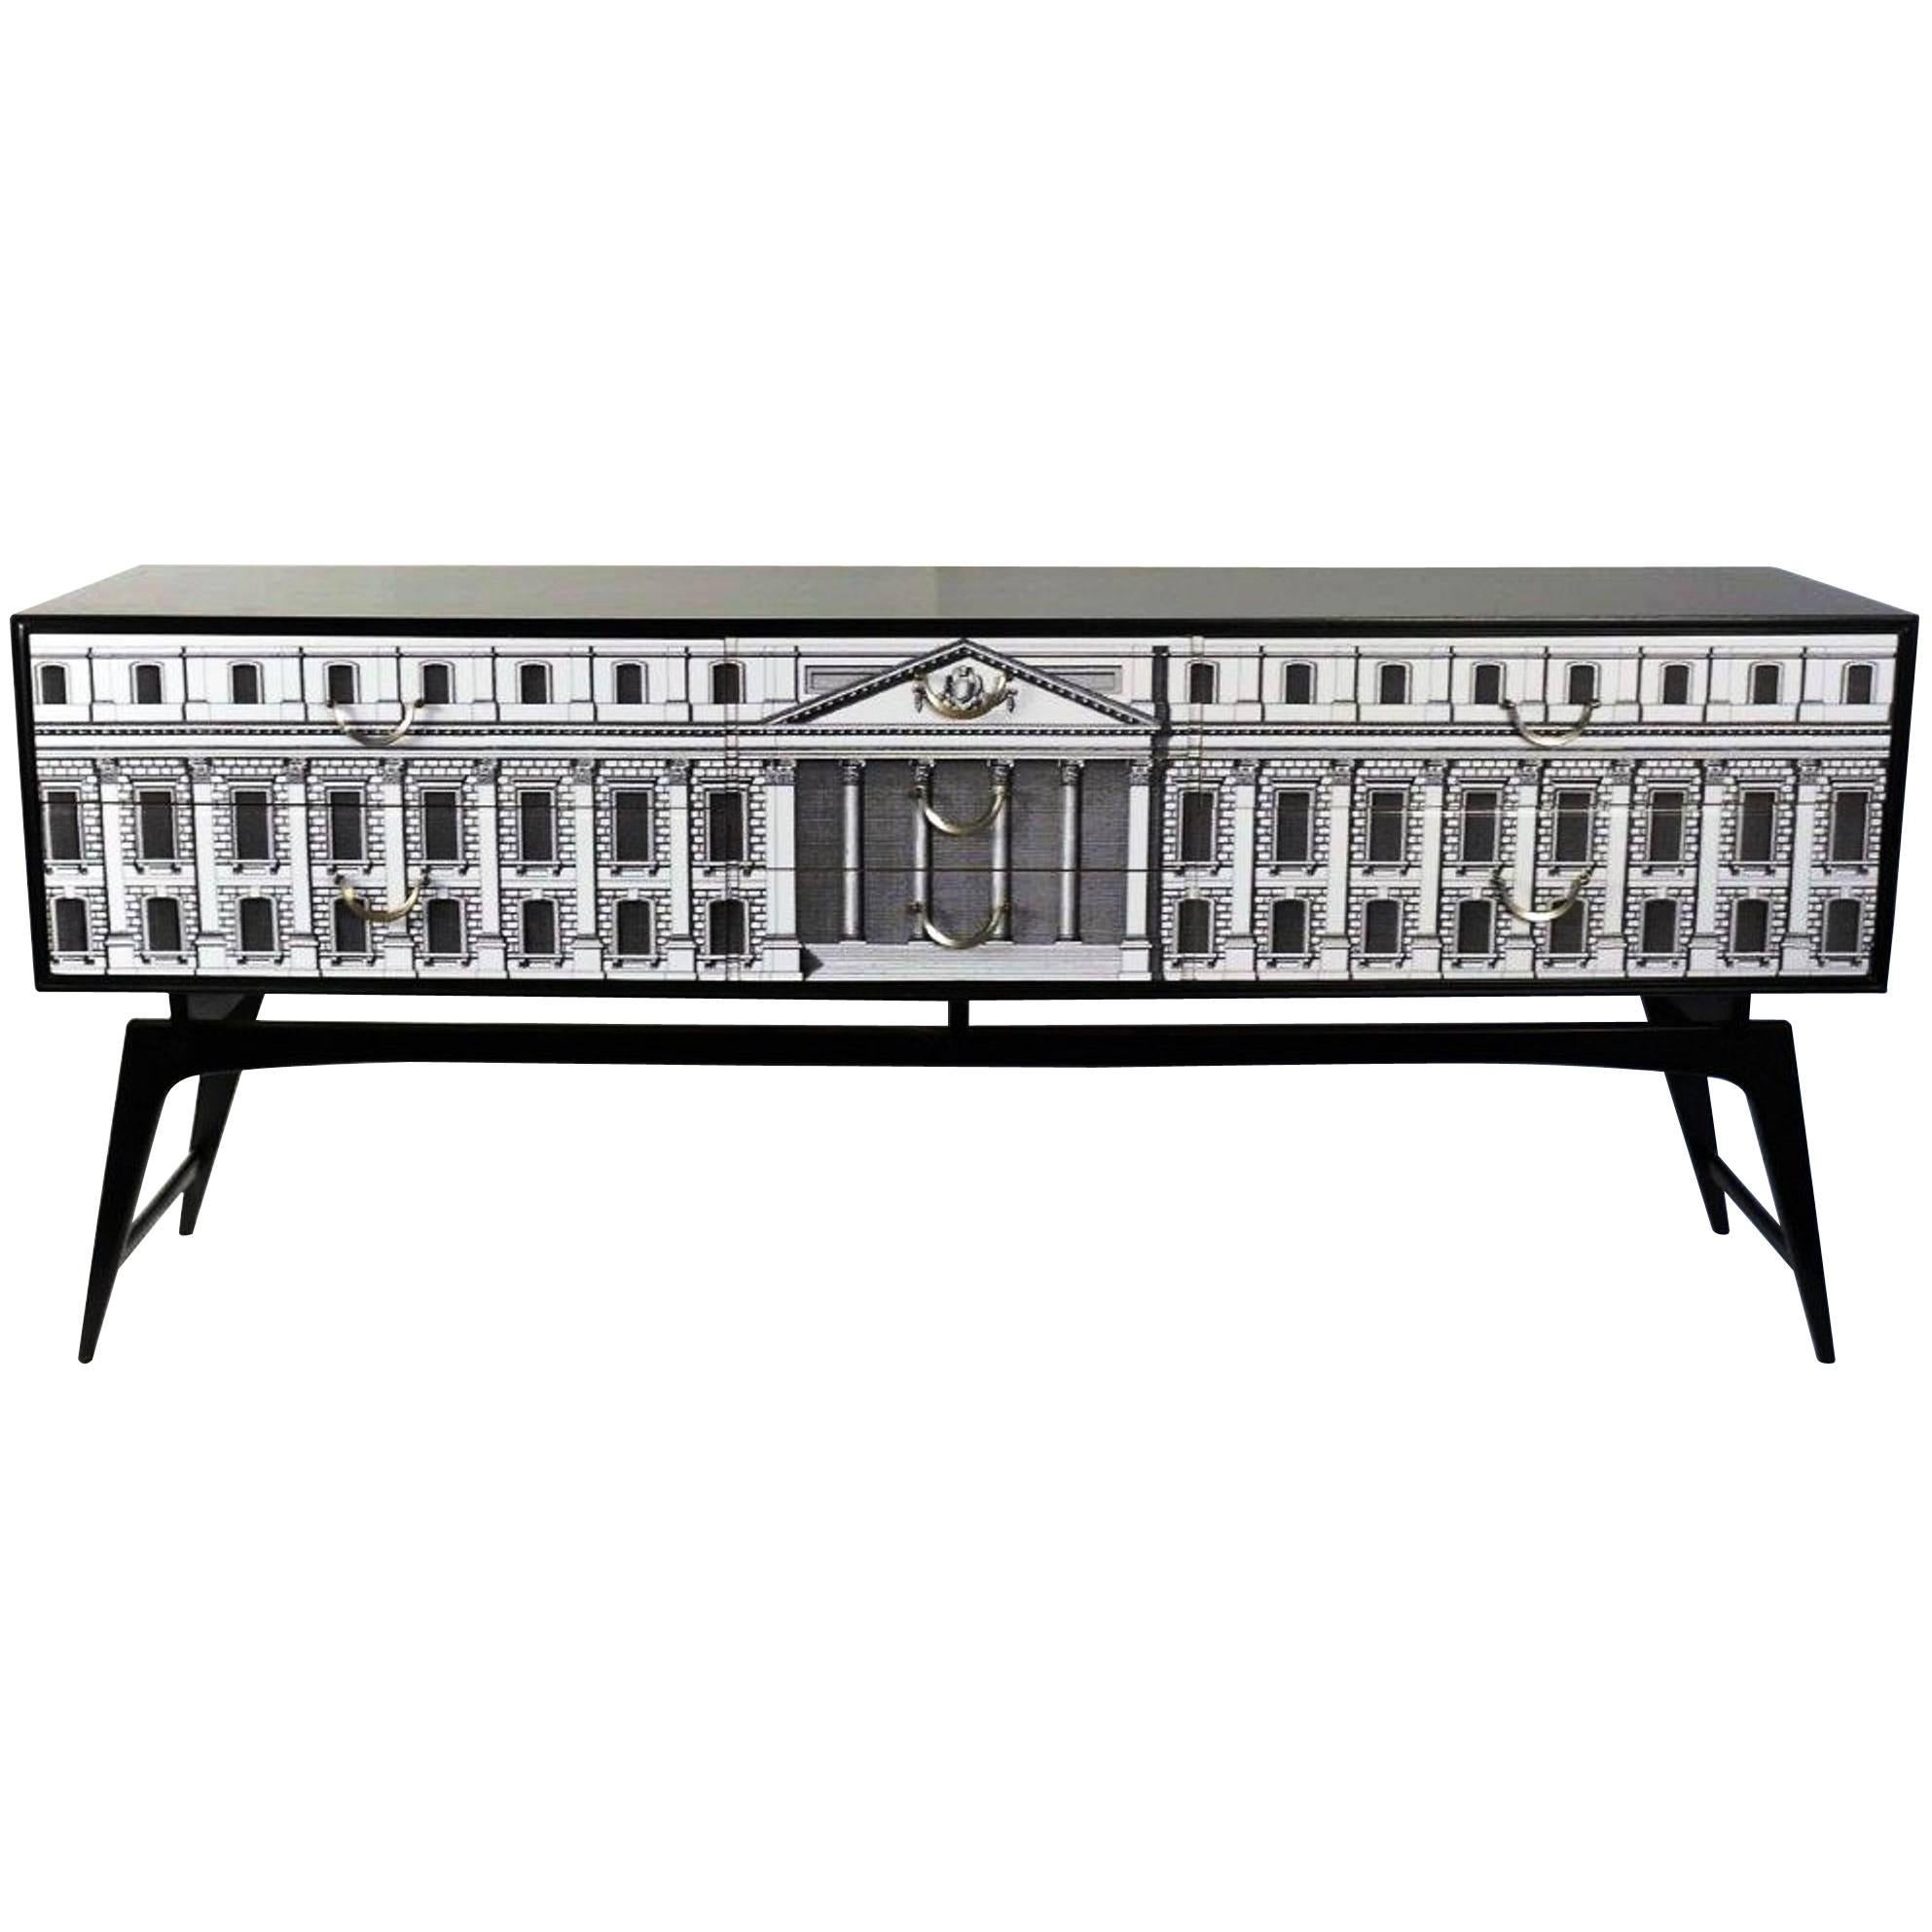 Spectacular 1950s Sideboard in the Style of Fornasetti, Customized Later